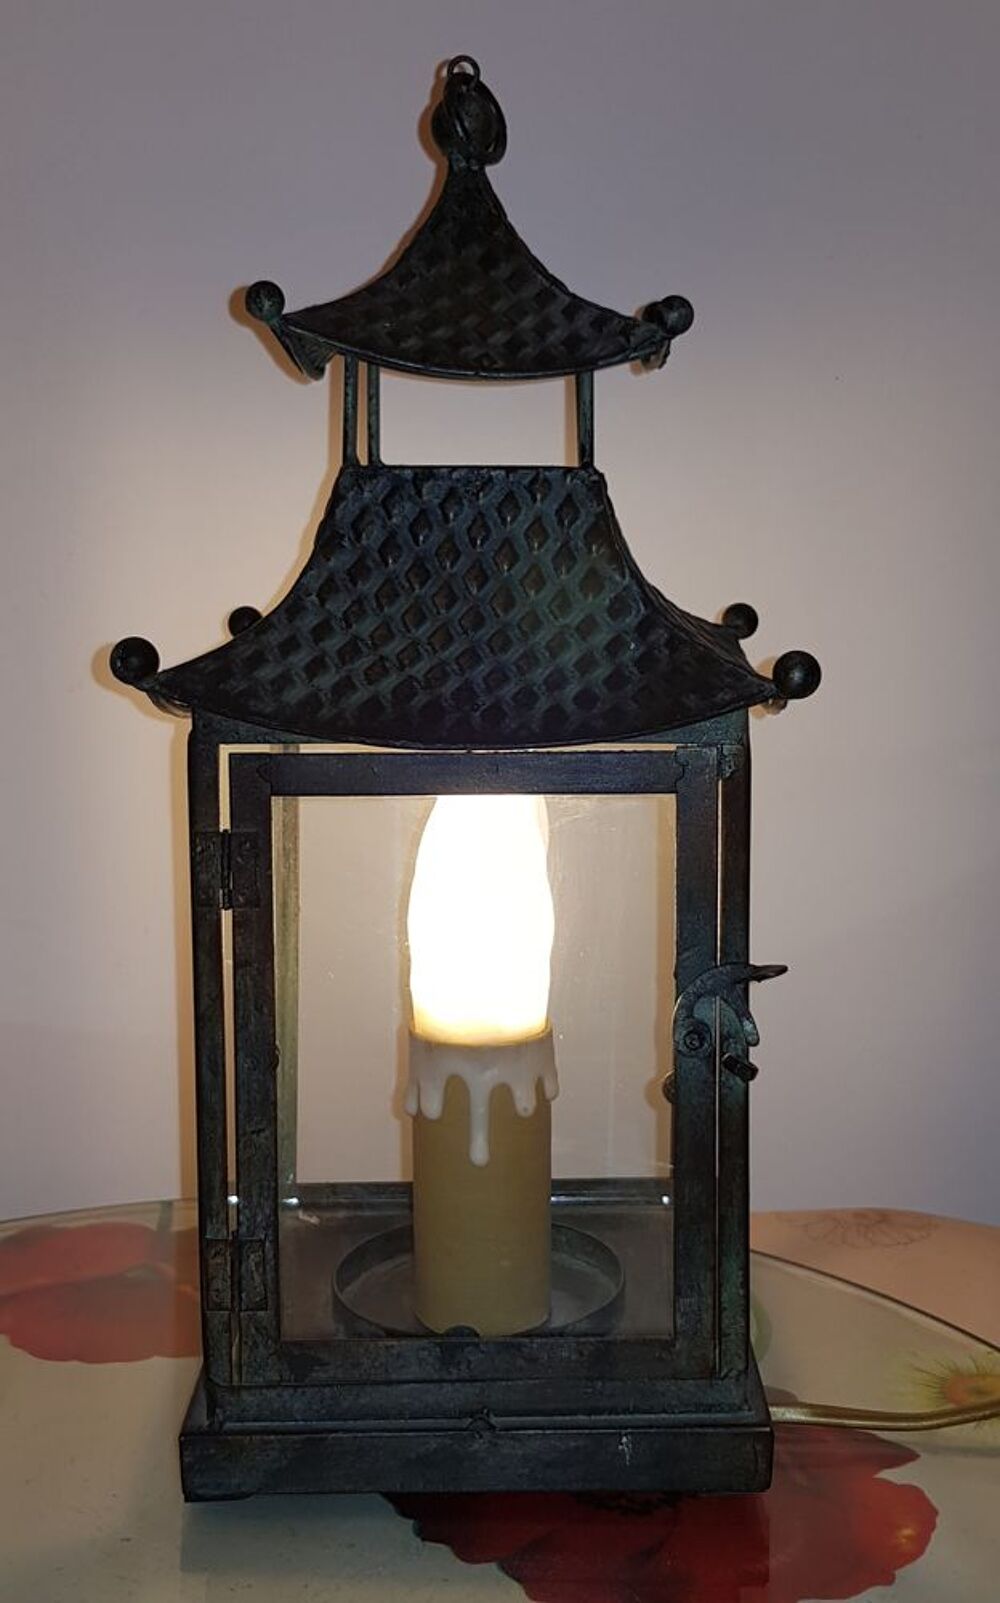 JOLIE LAMPE CHINOISE DE FORME PAGODE Dcoration